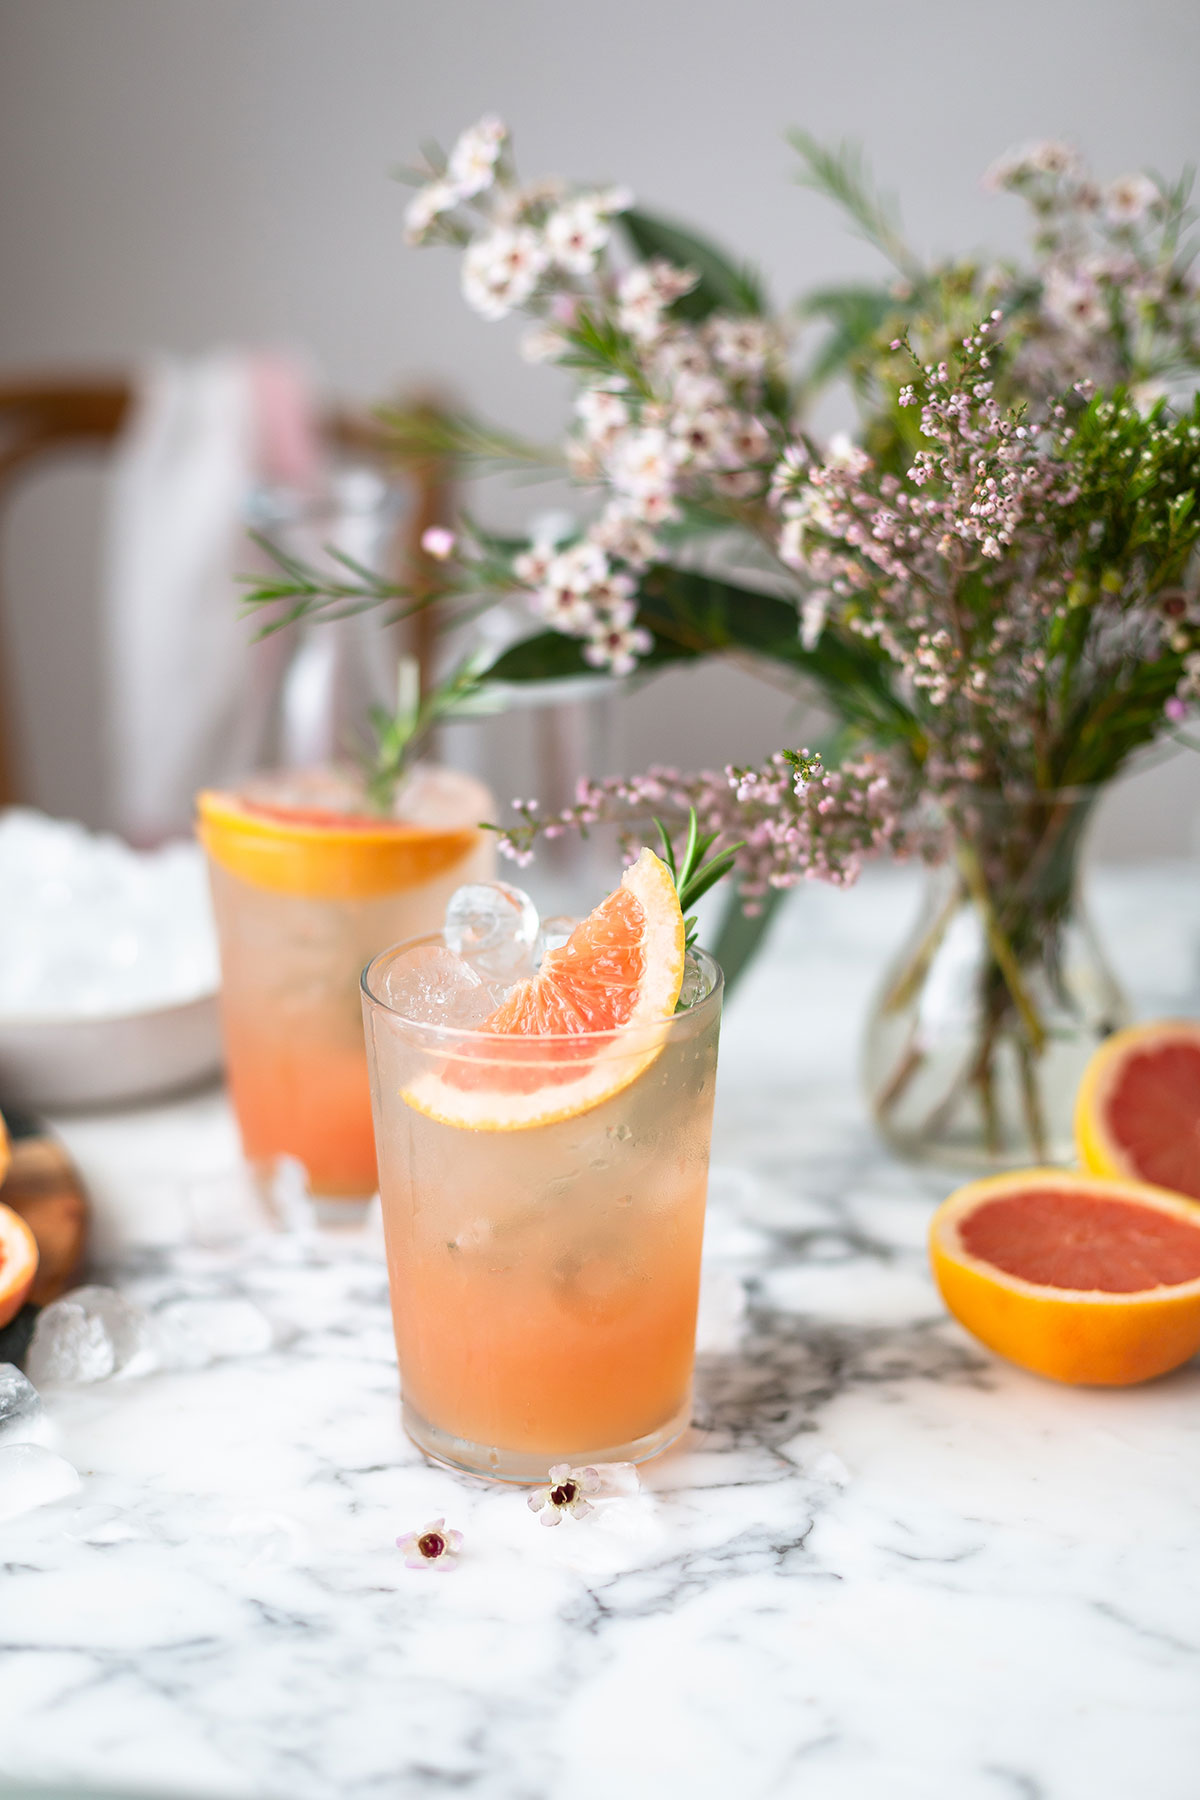 Gin & tonic with pink grapefruit